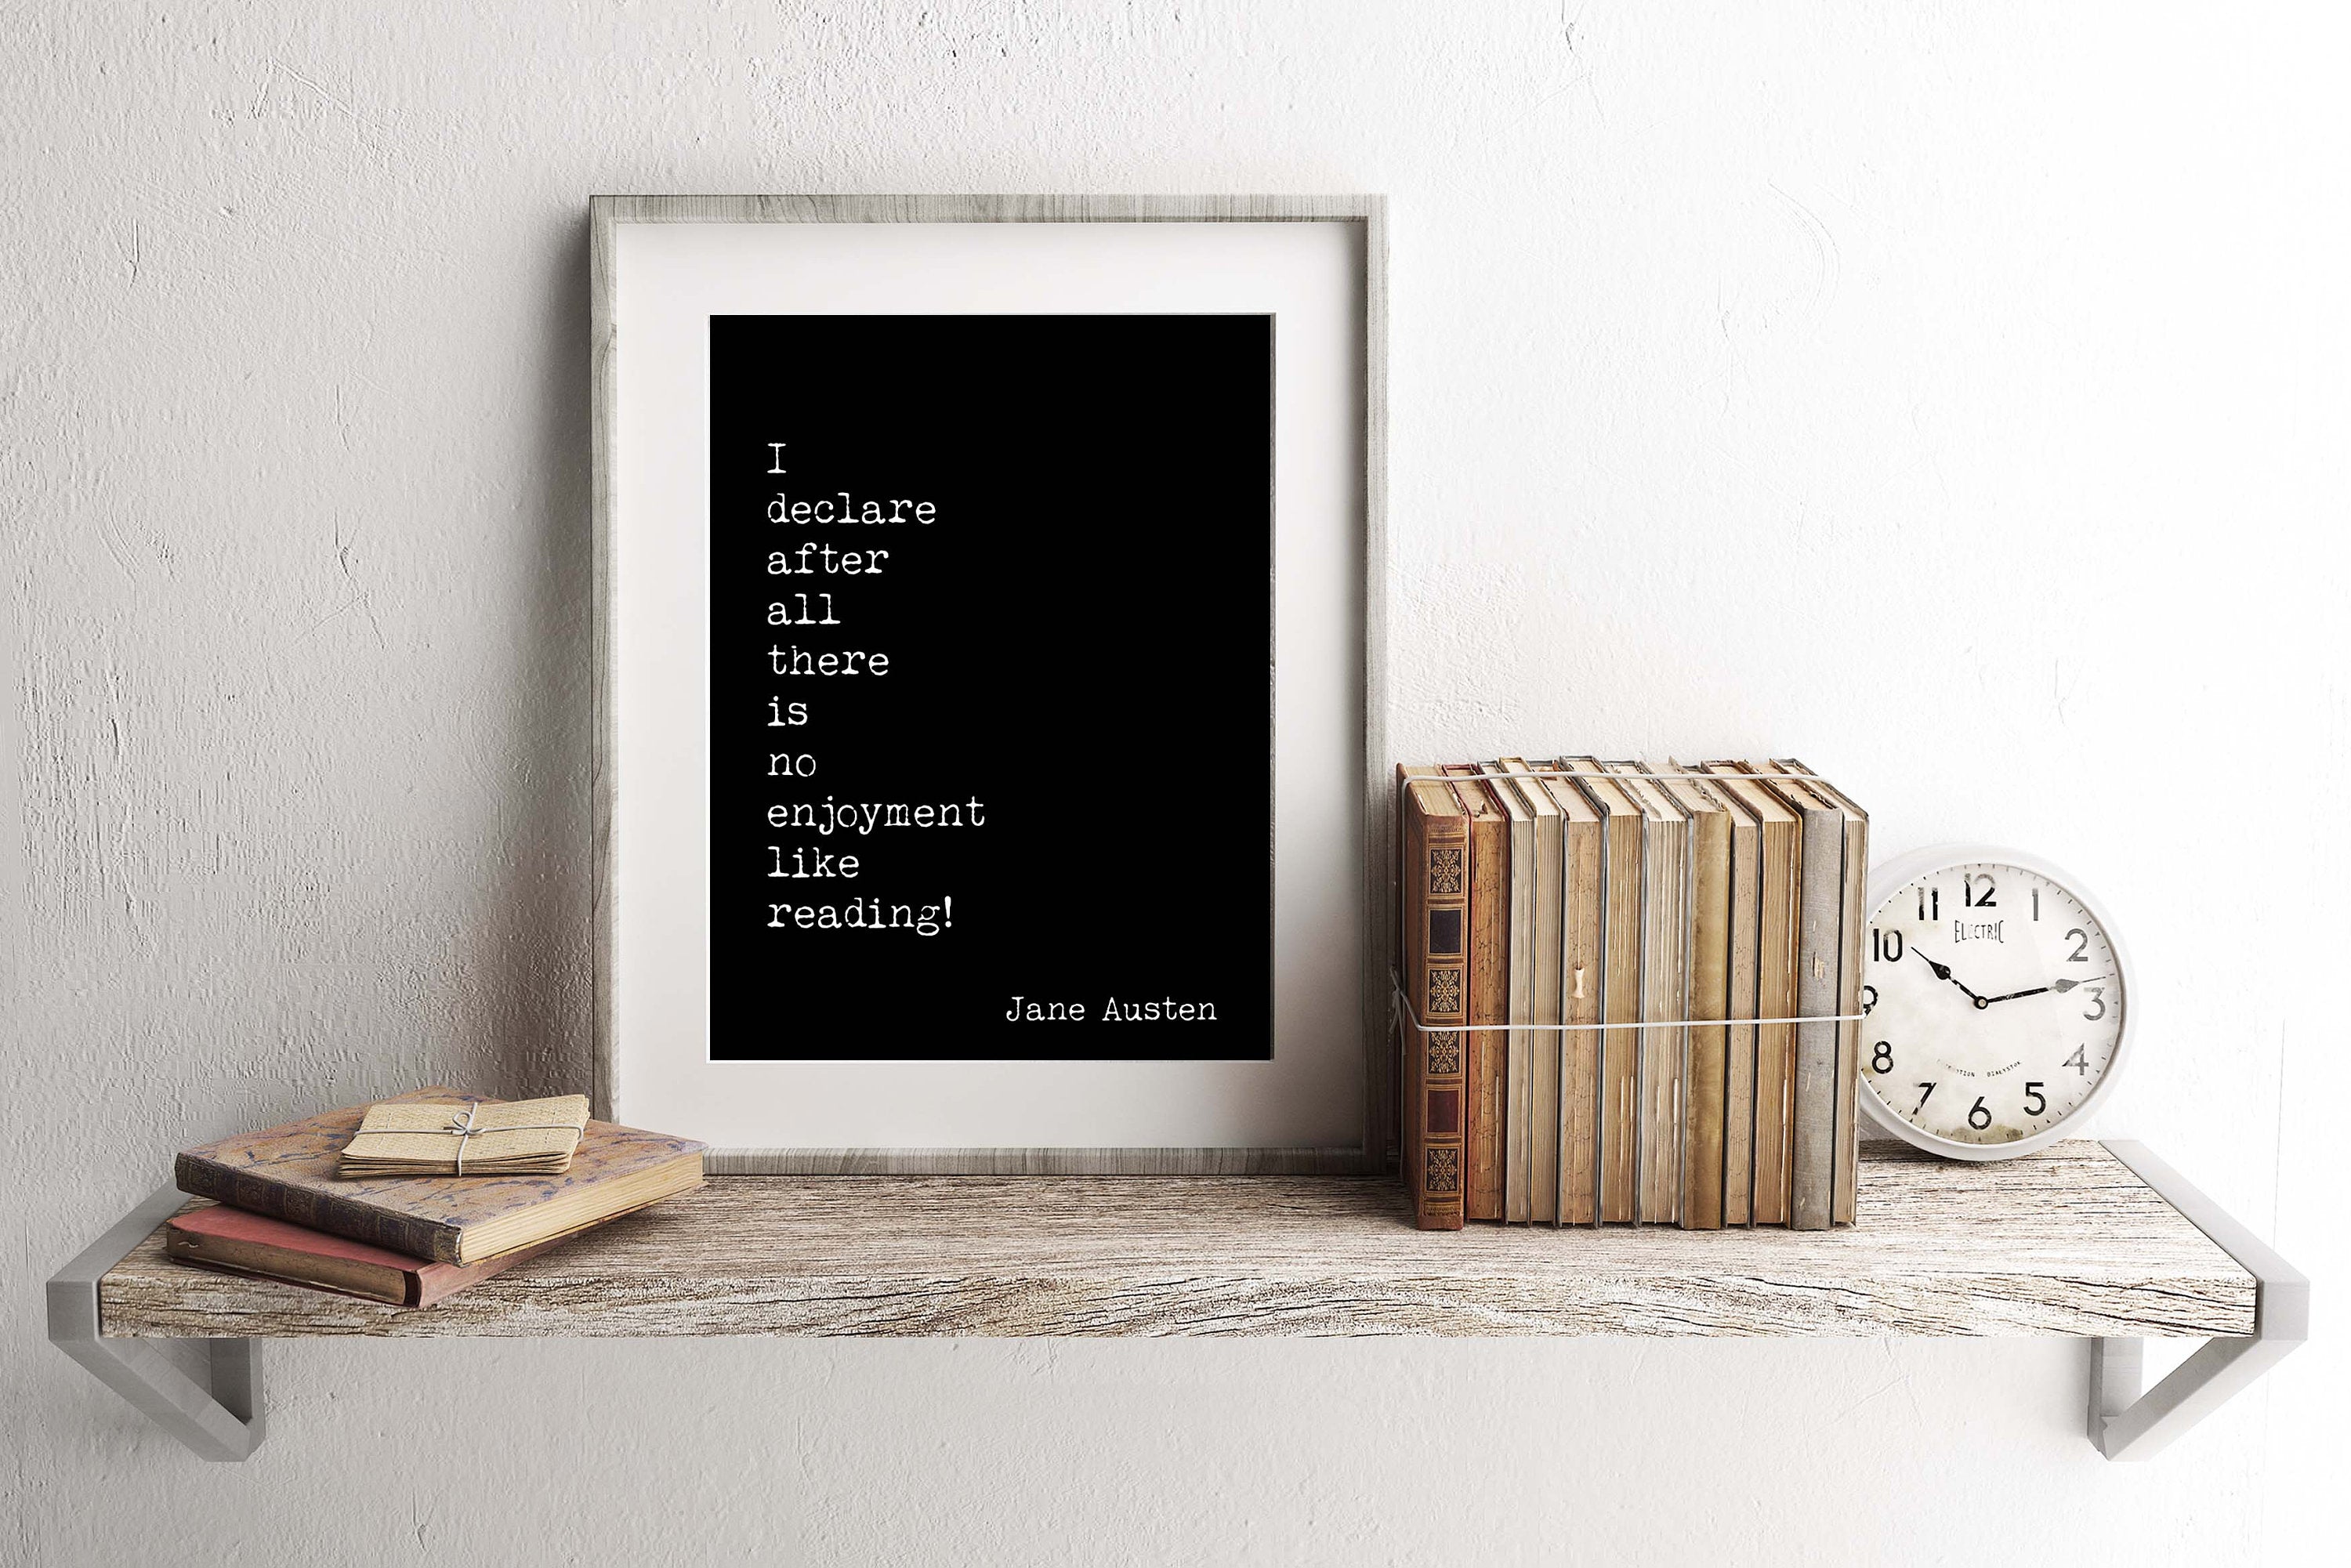 Pride and Prejudice Print, Reading Quote, Jane Austen Quote Art, No Enjoyment Like Reading Book Quote Print, Jane Austen Wall Art Unframed - BookQuoteDecor